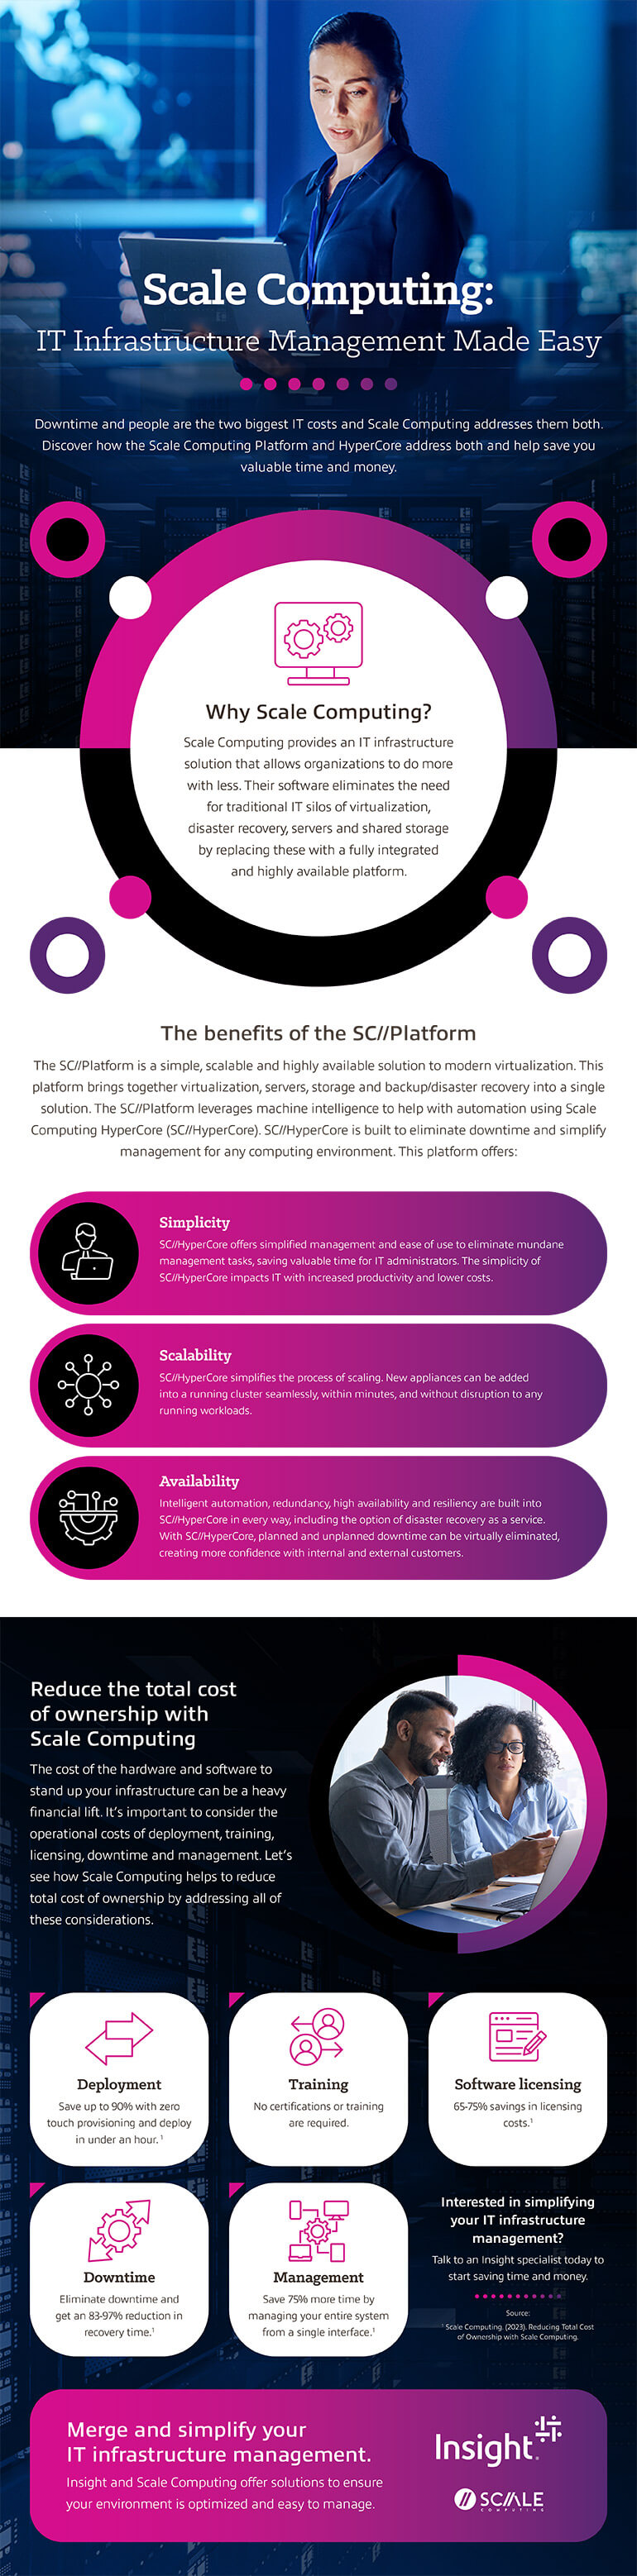 Scale Computing: IT Infrastructure Management Made Easy infographic transcribed below